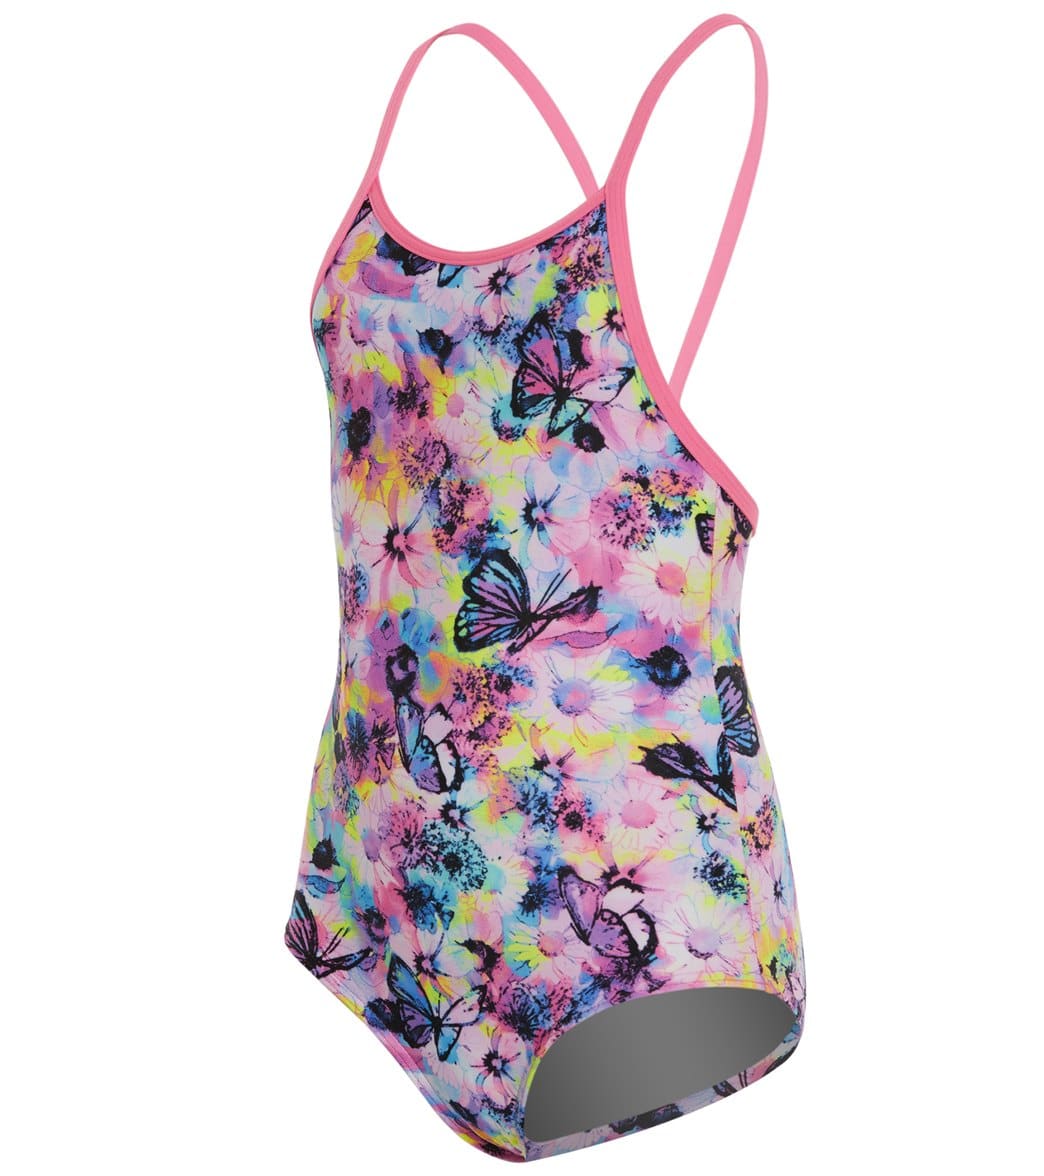 Funkita Toddler Girls Water Garden One Piece Swimsuit - Multi Pink 1T Polyester - Swimoutlet.com